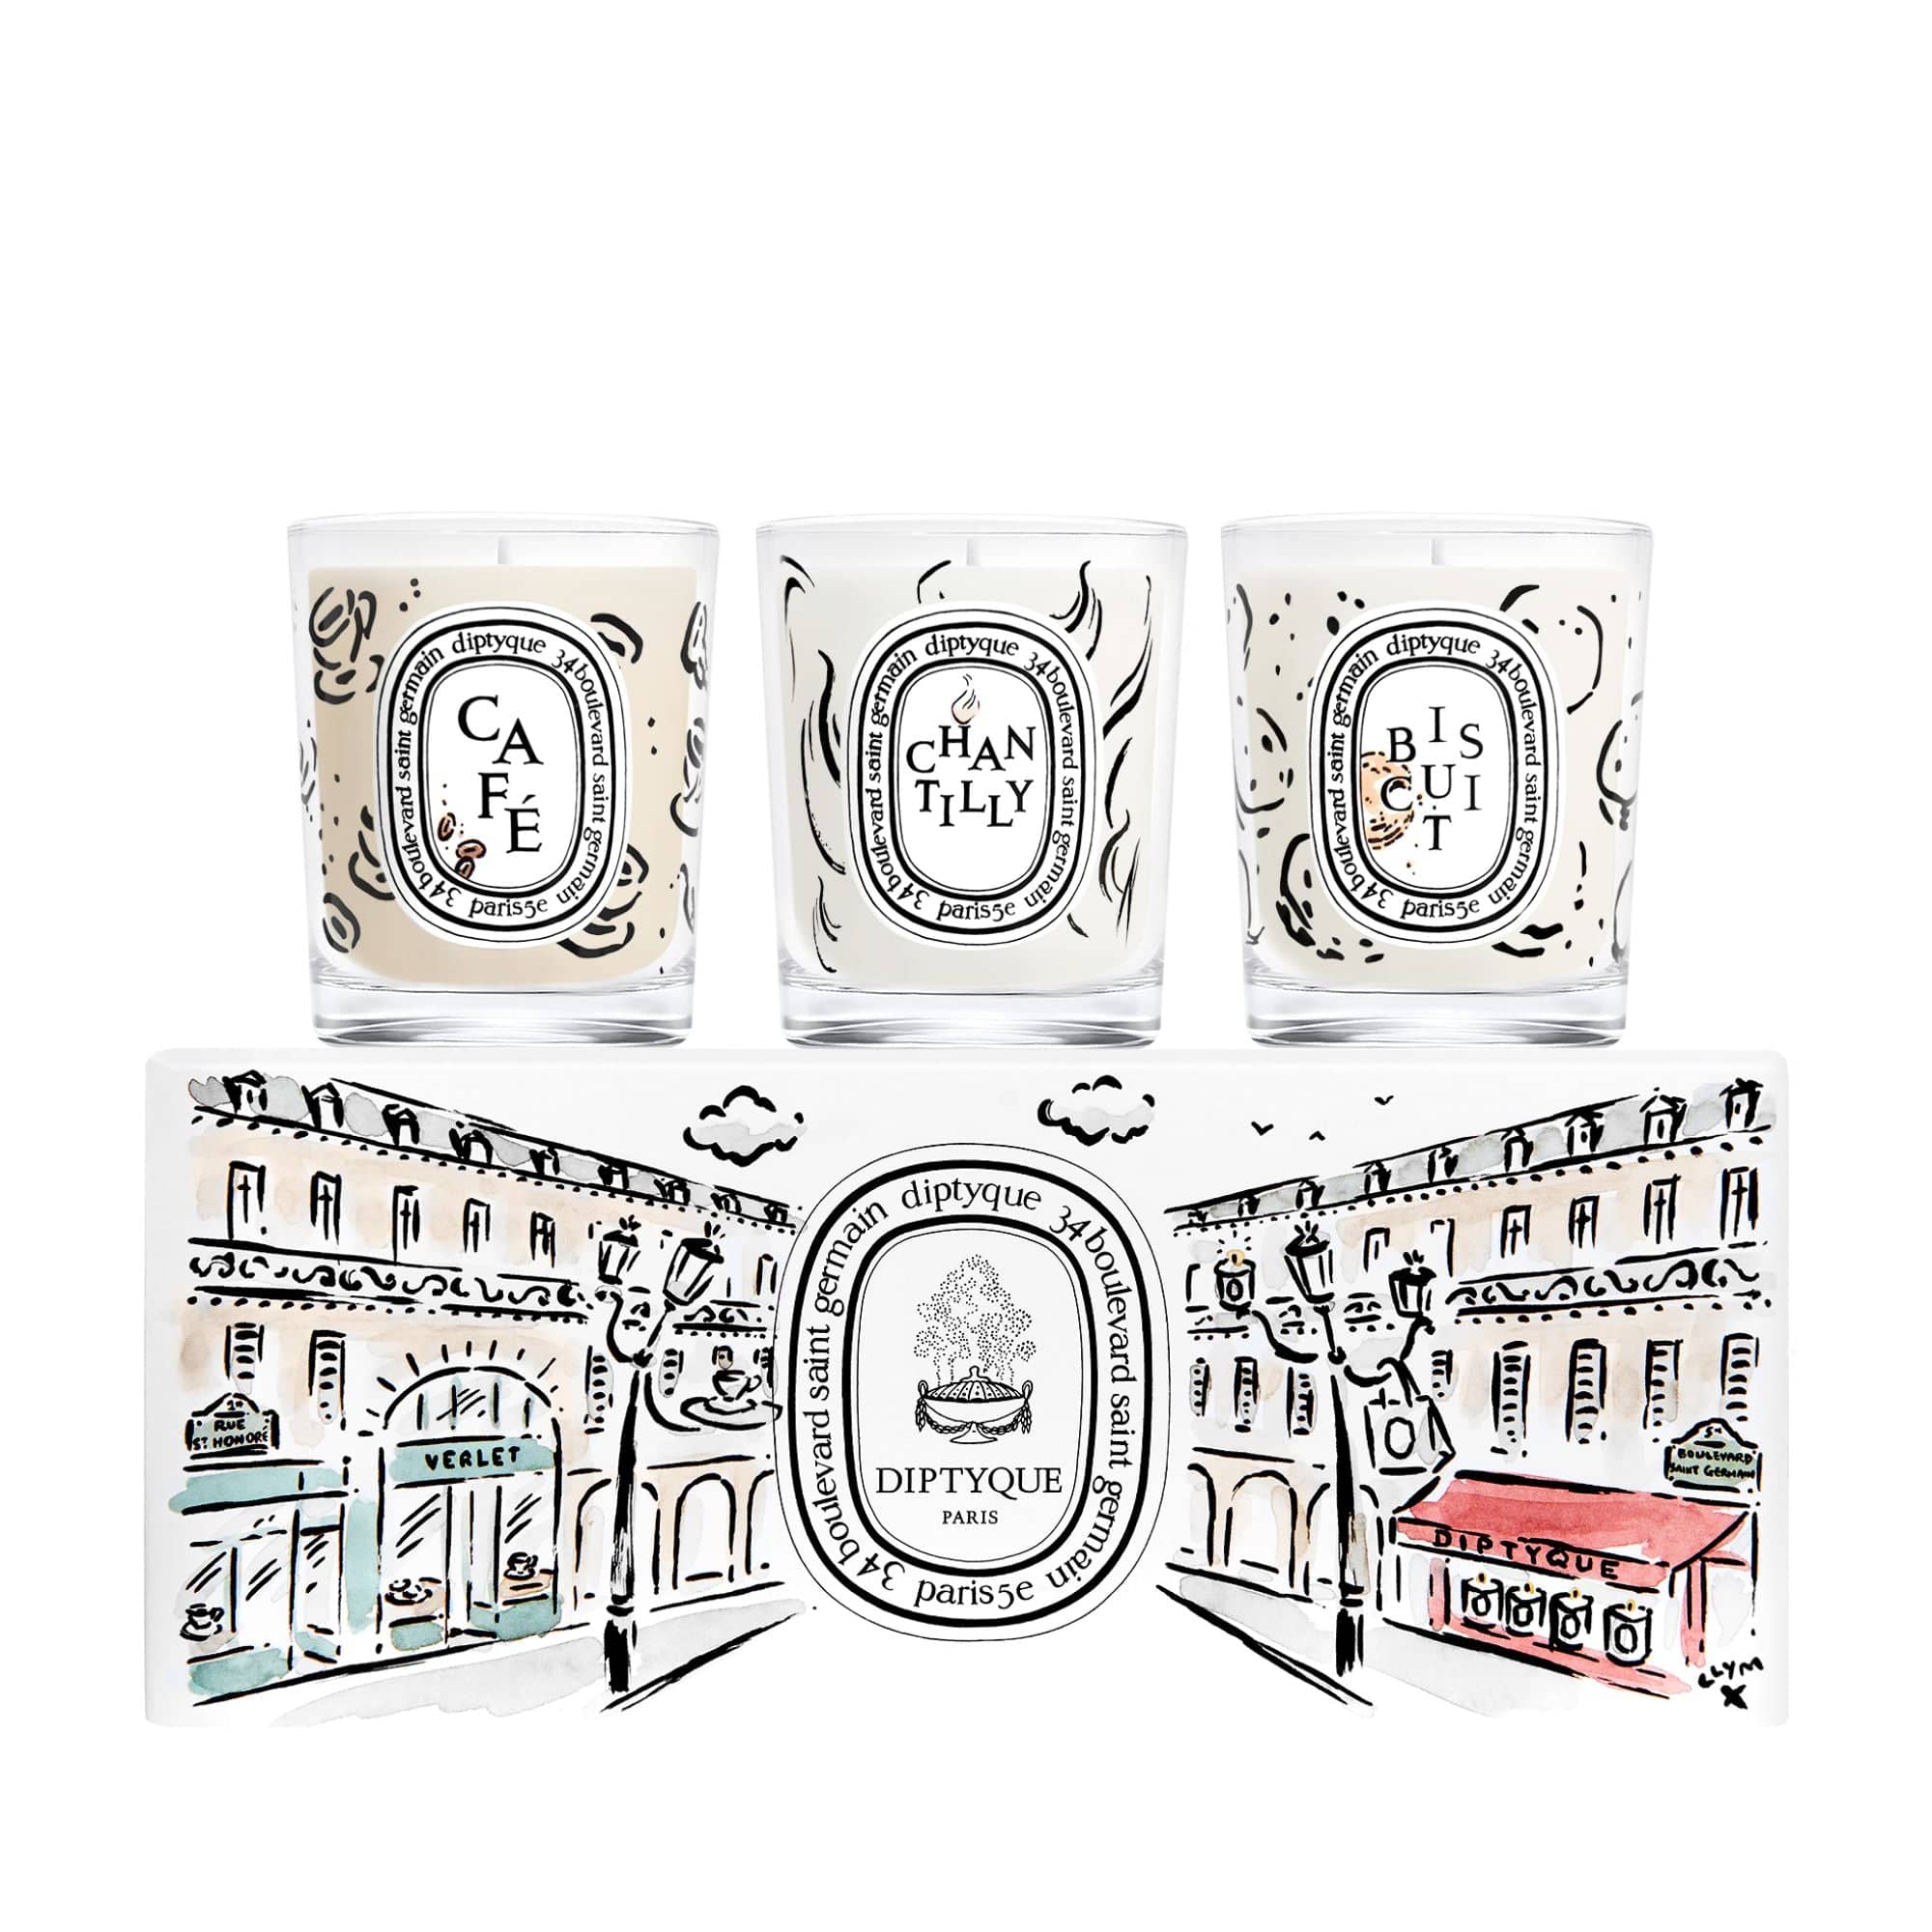 Coffee, Chantilly and Biscuits Diptyque Set Limited Edition Set